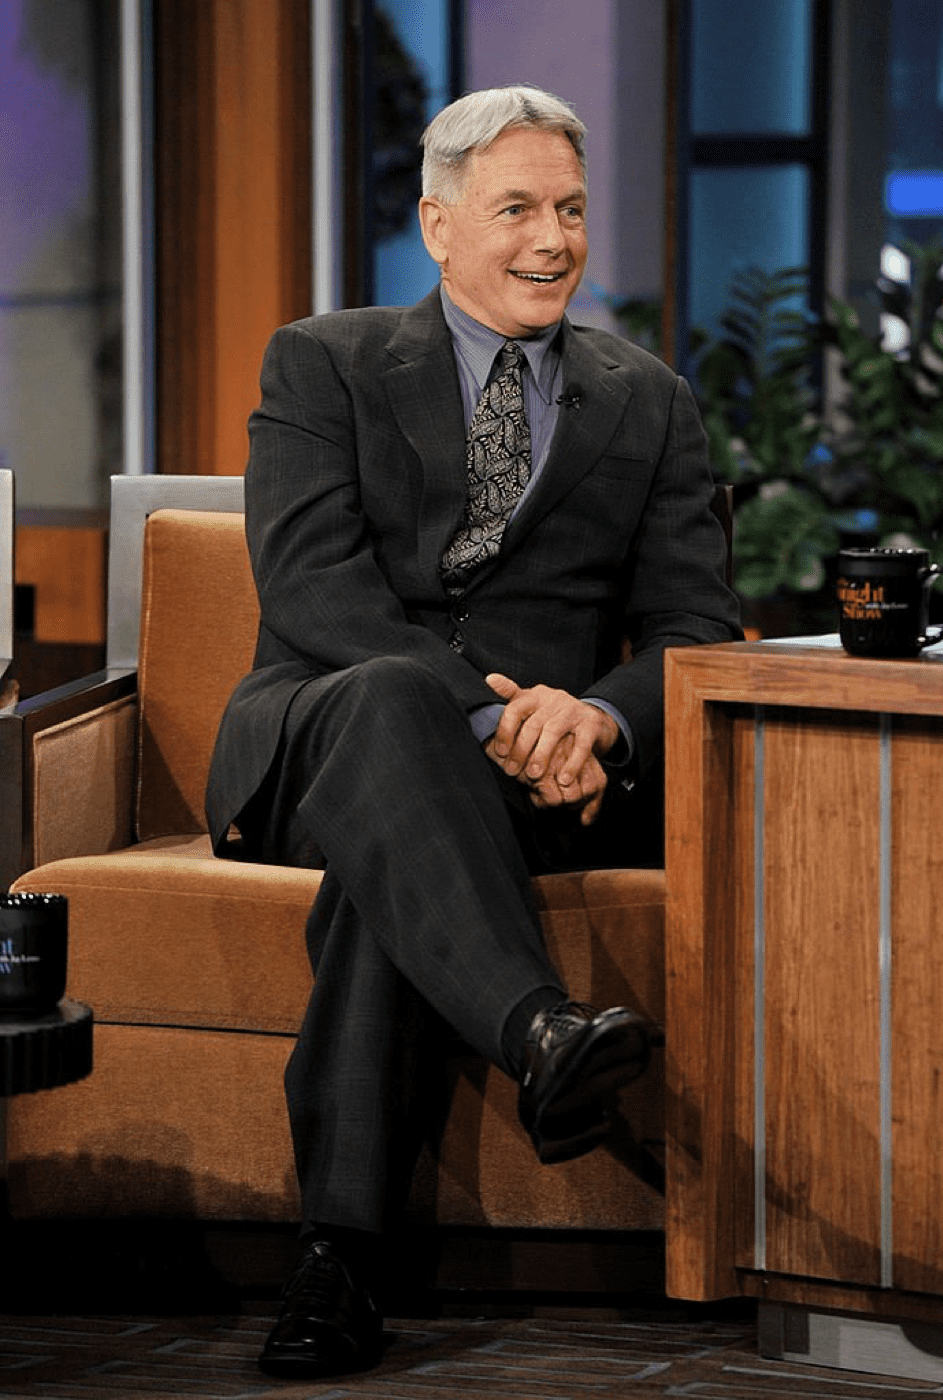 Mark Harmon bei "The Tonight Show With Jay Leno" in den NBC Studios am 31. Januar 2012. | Quelle: Getty Images